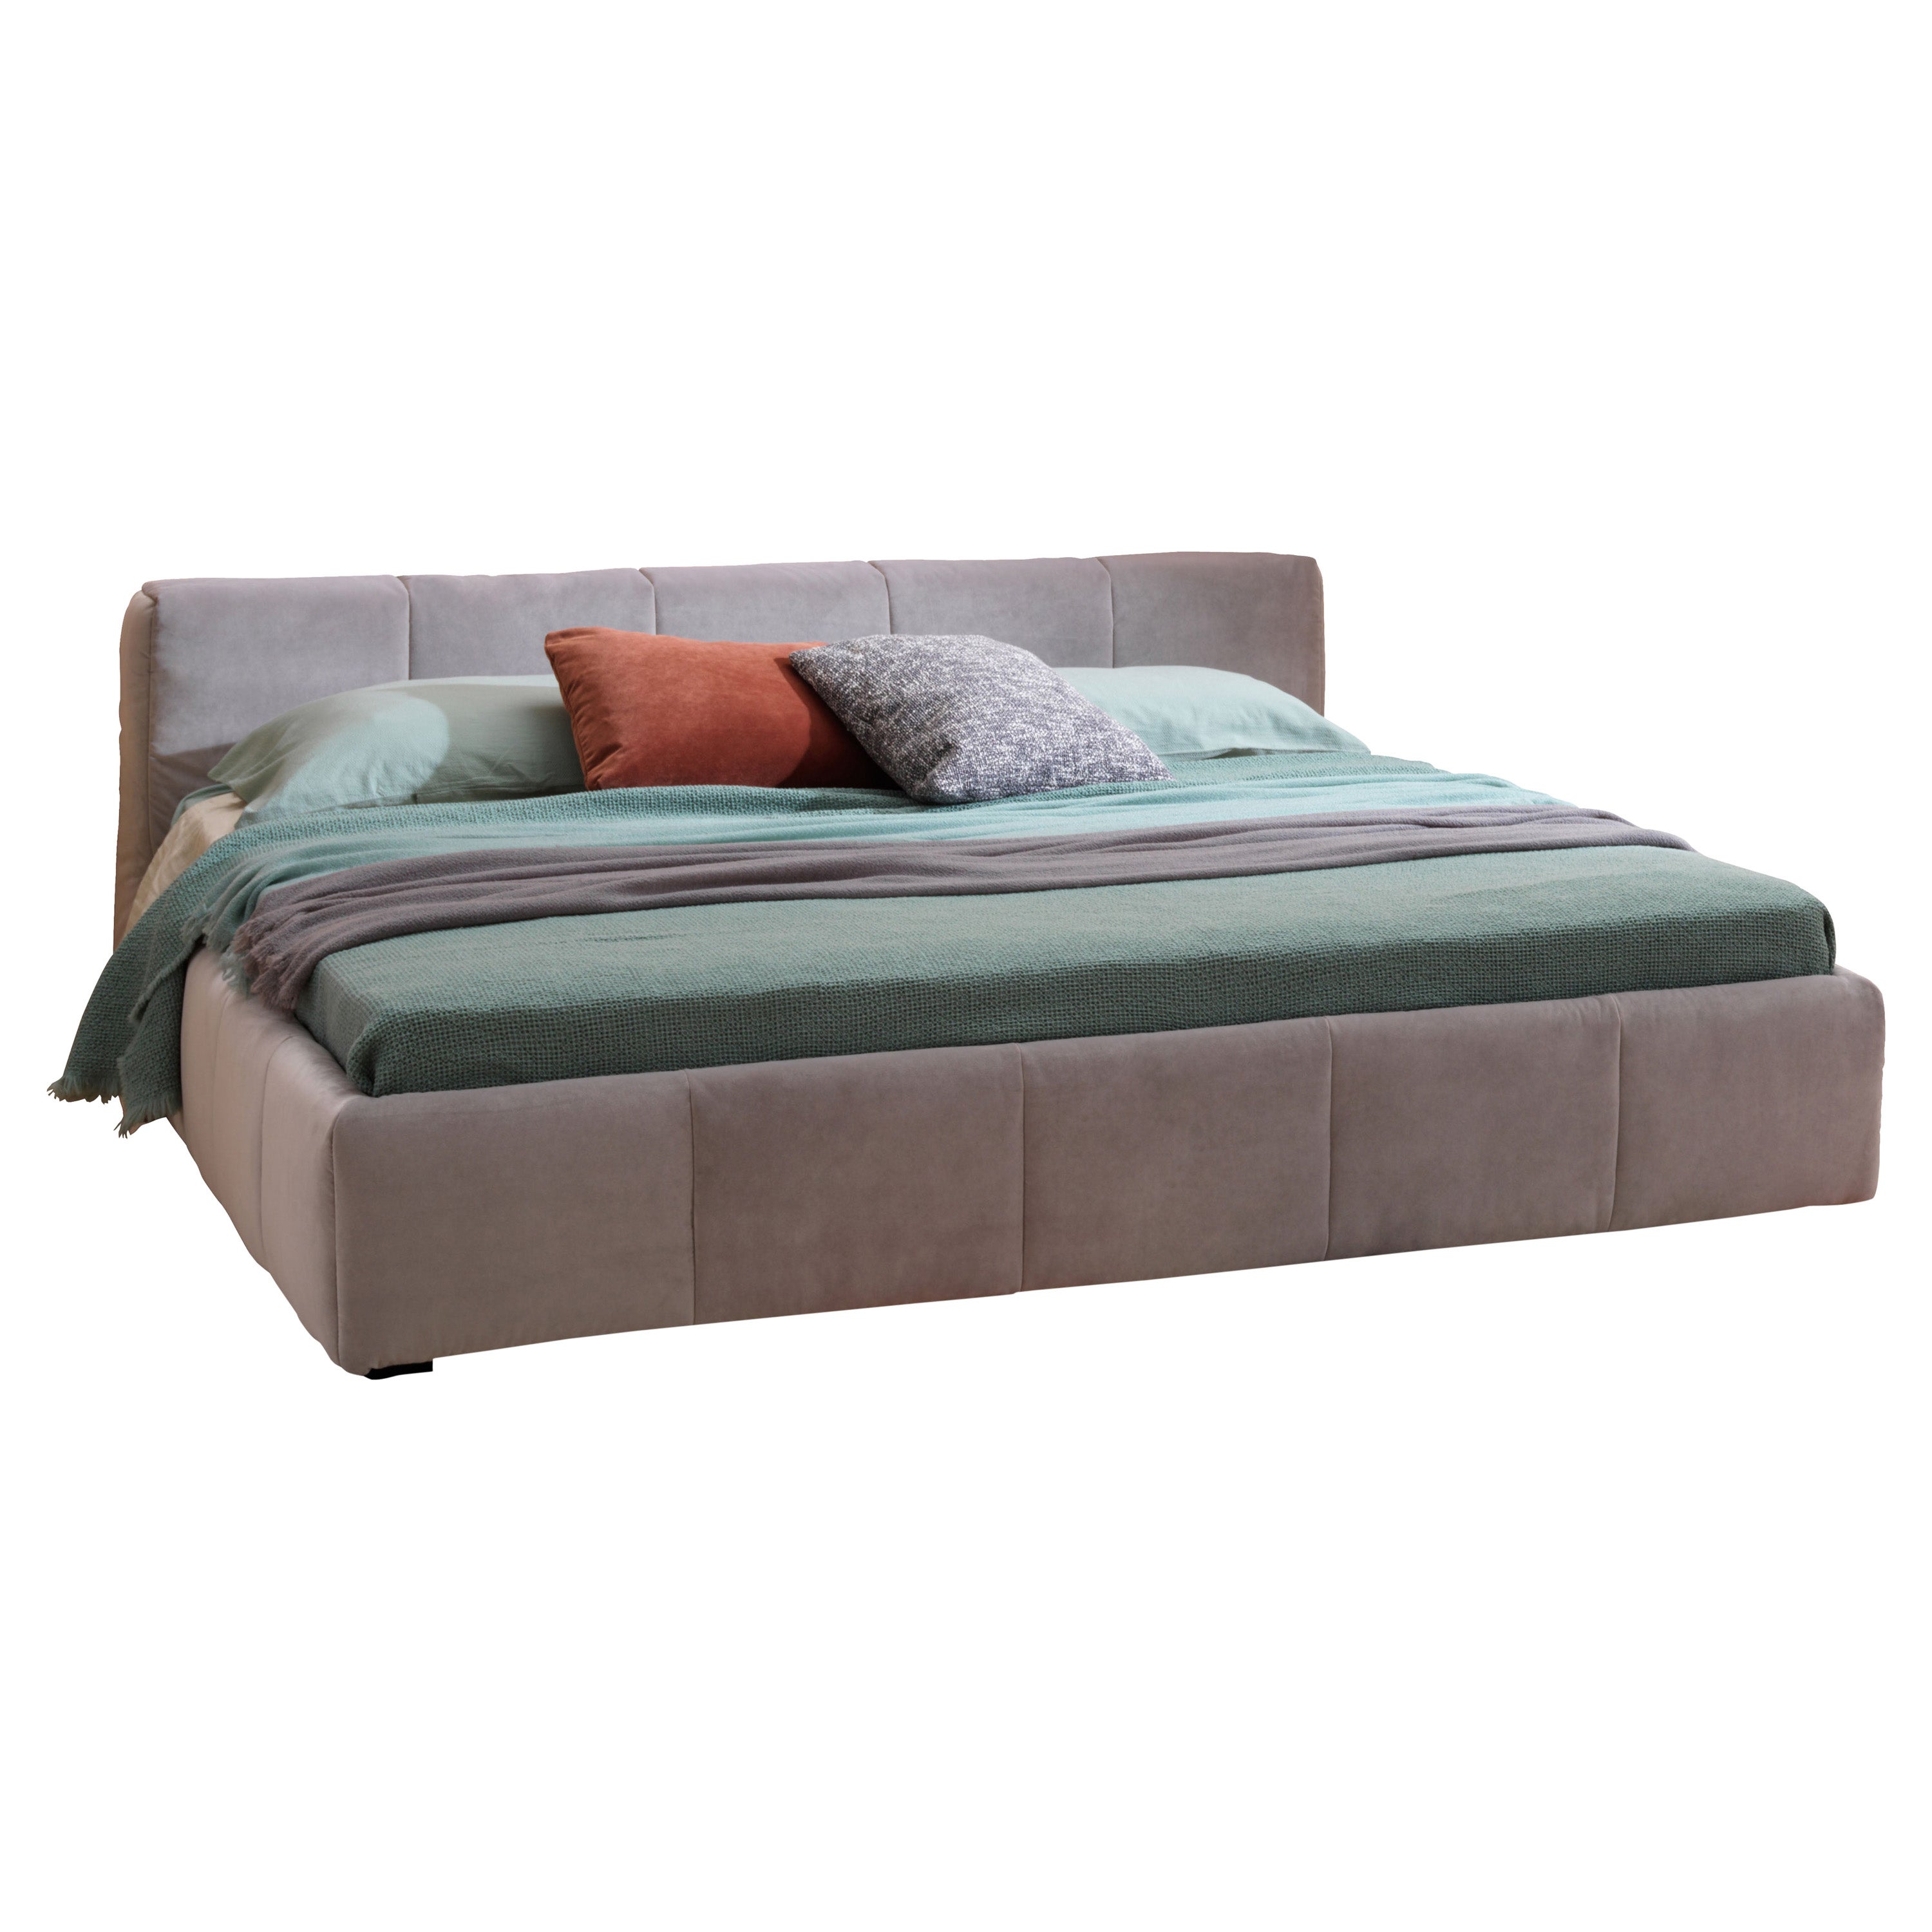 Pixel Box King Size Bed in Velvet Upholstery with Base by Sergio Bicego For Sale